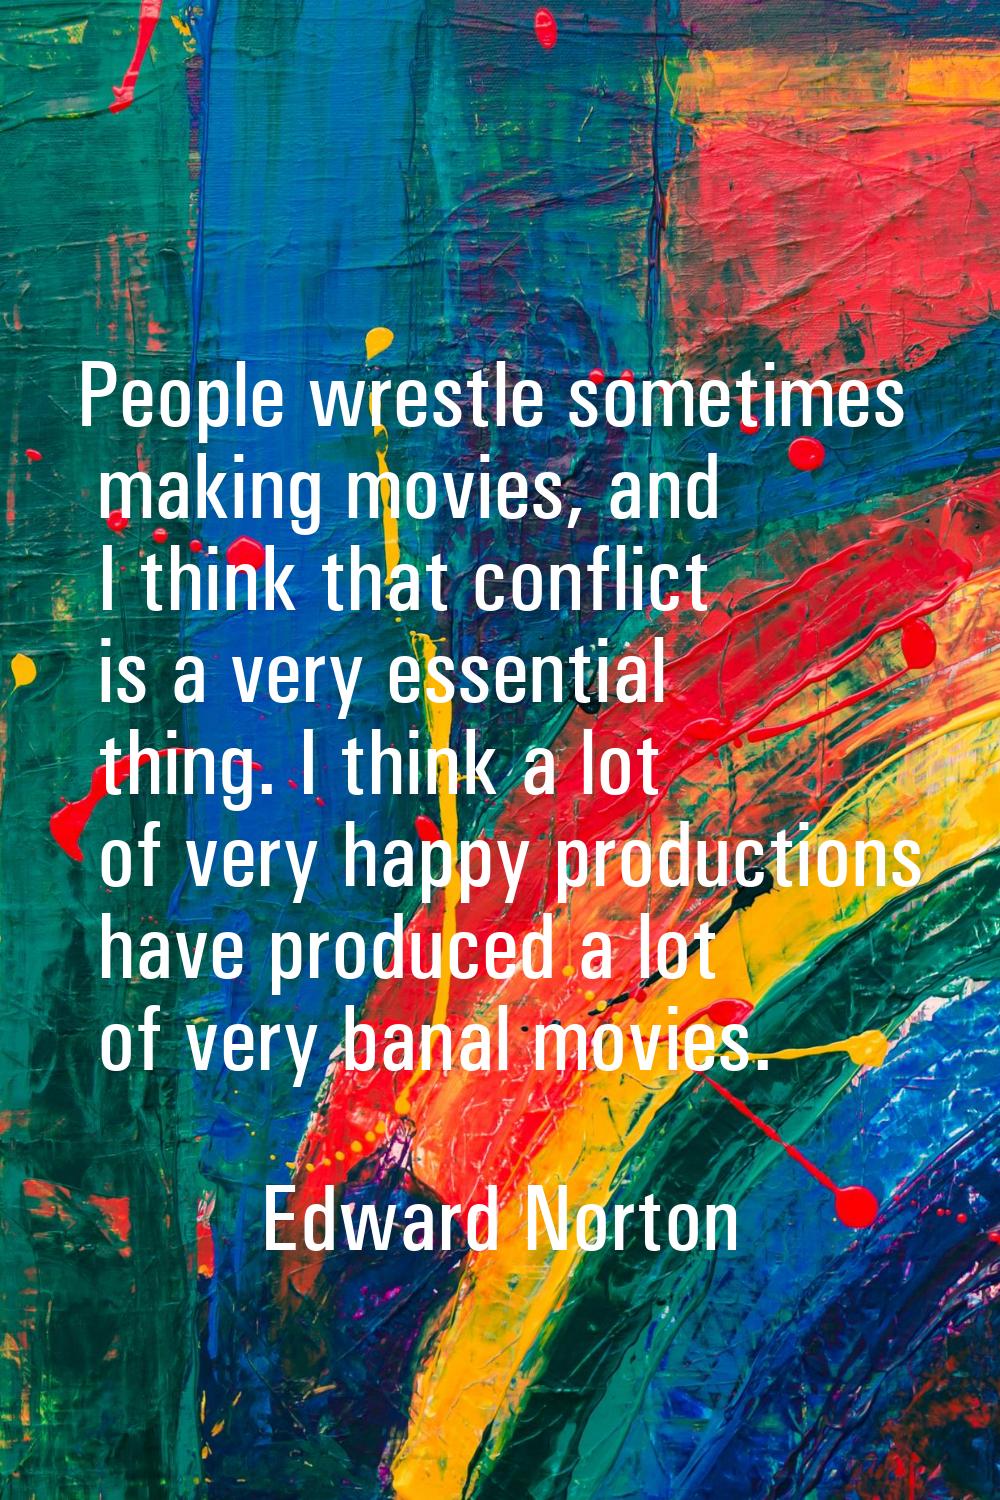 People wrestle sometimes making movies, and I think that conflict is a very essential thing. I thin